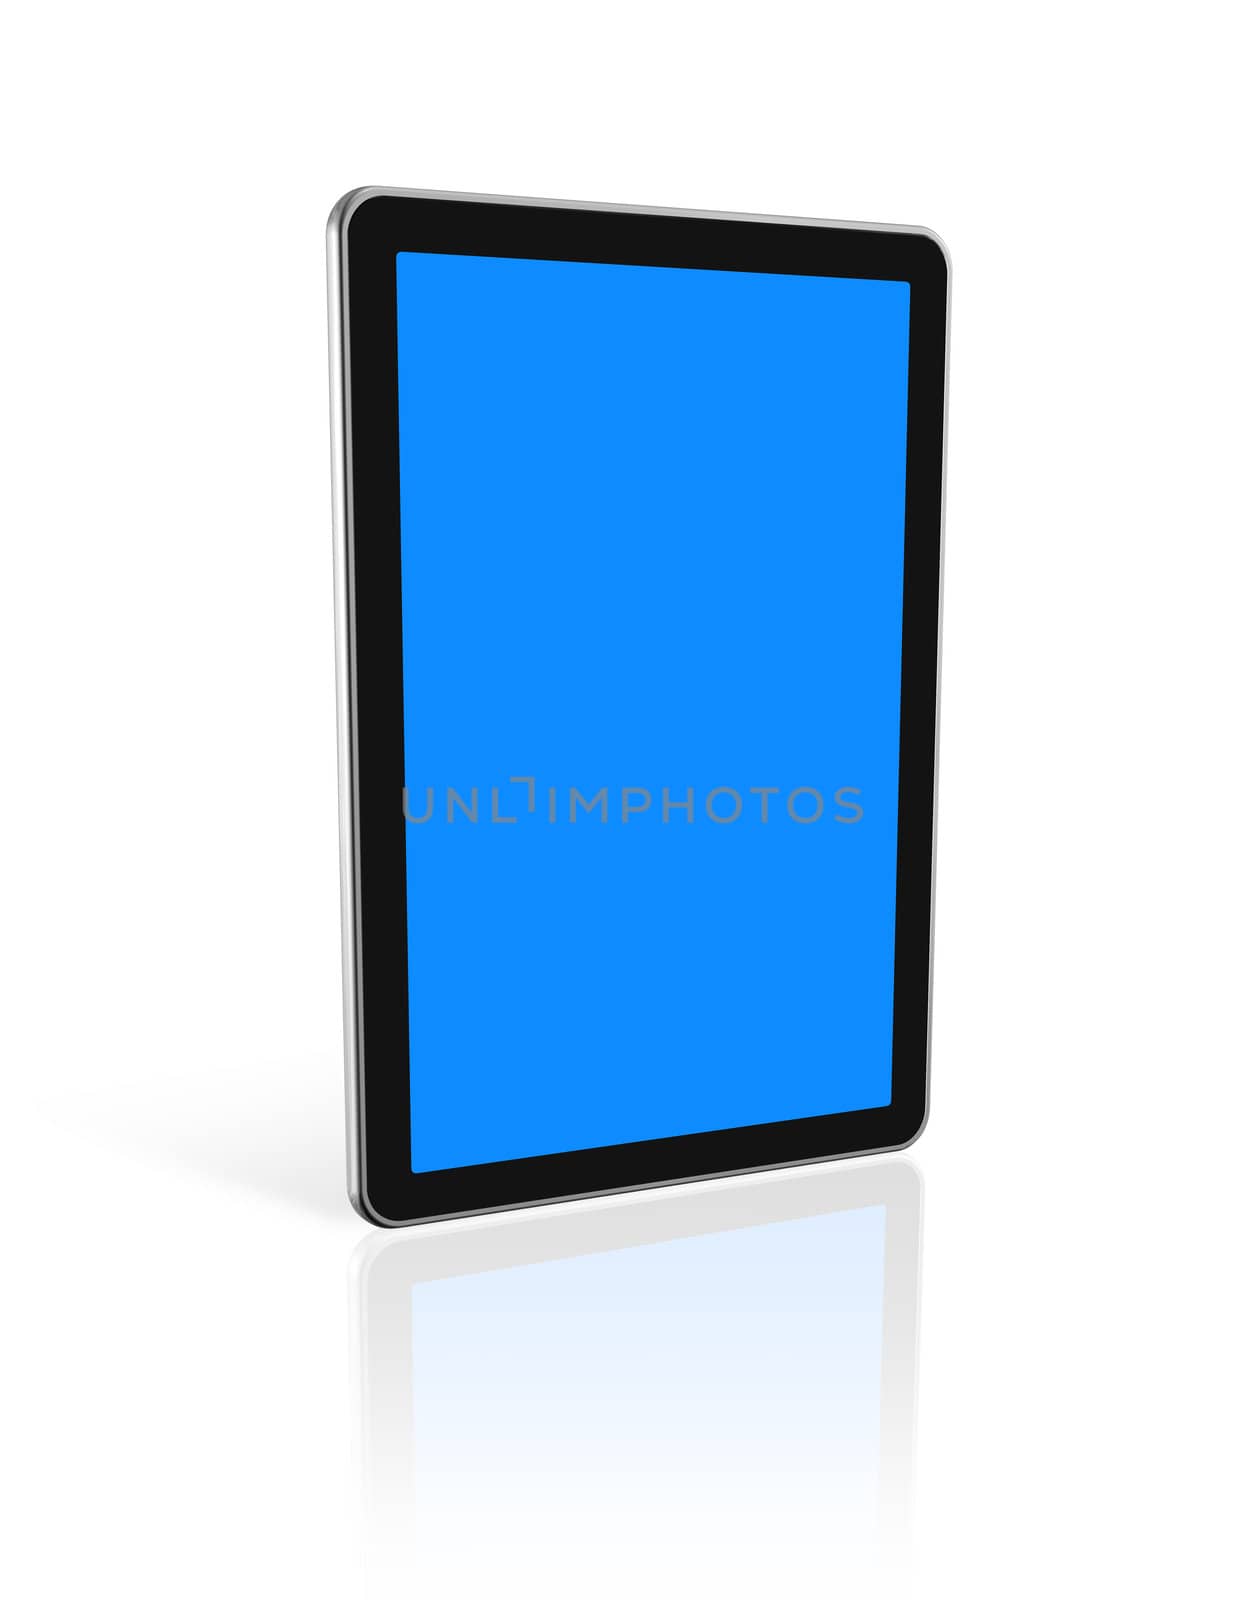 3D digital tablet pc, computer screen isolated on white. With 2 clipping paths : global scene clipping path and screens clipping path to place your designs or pictures